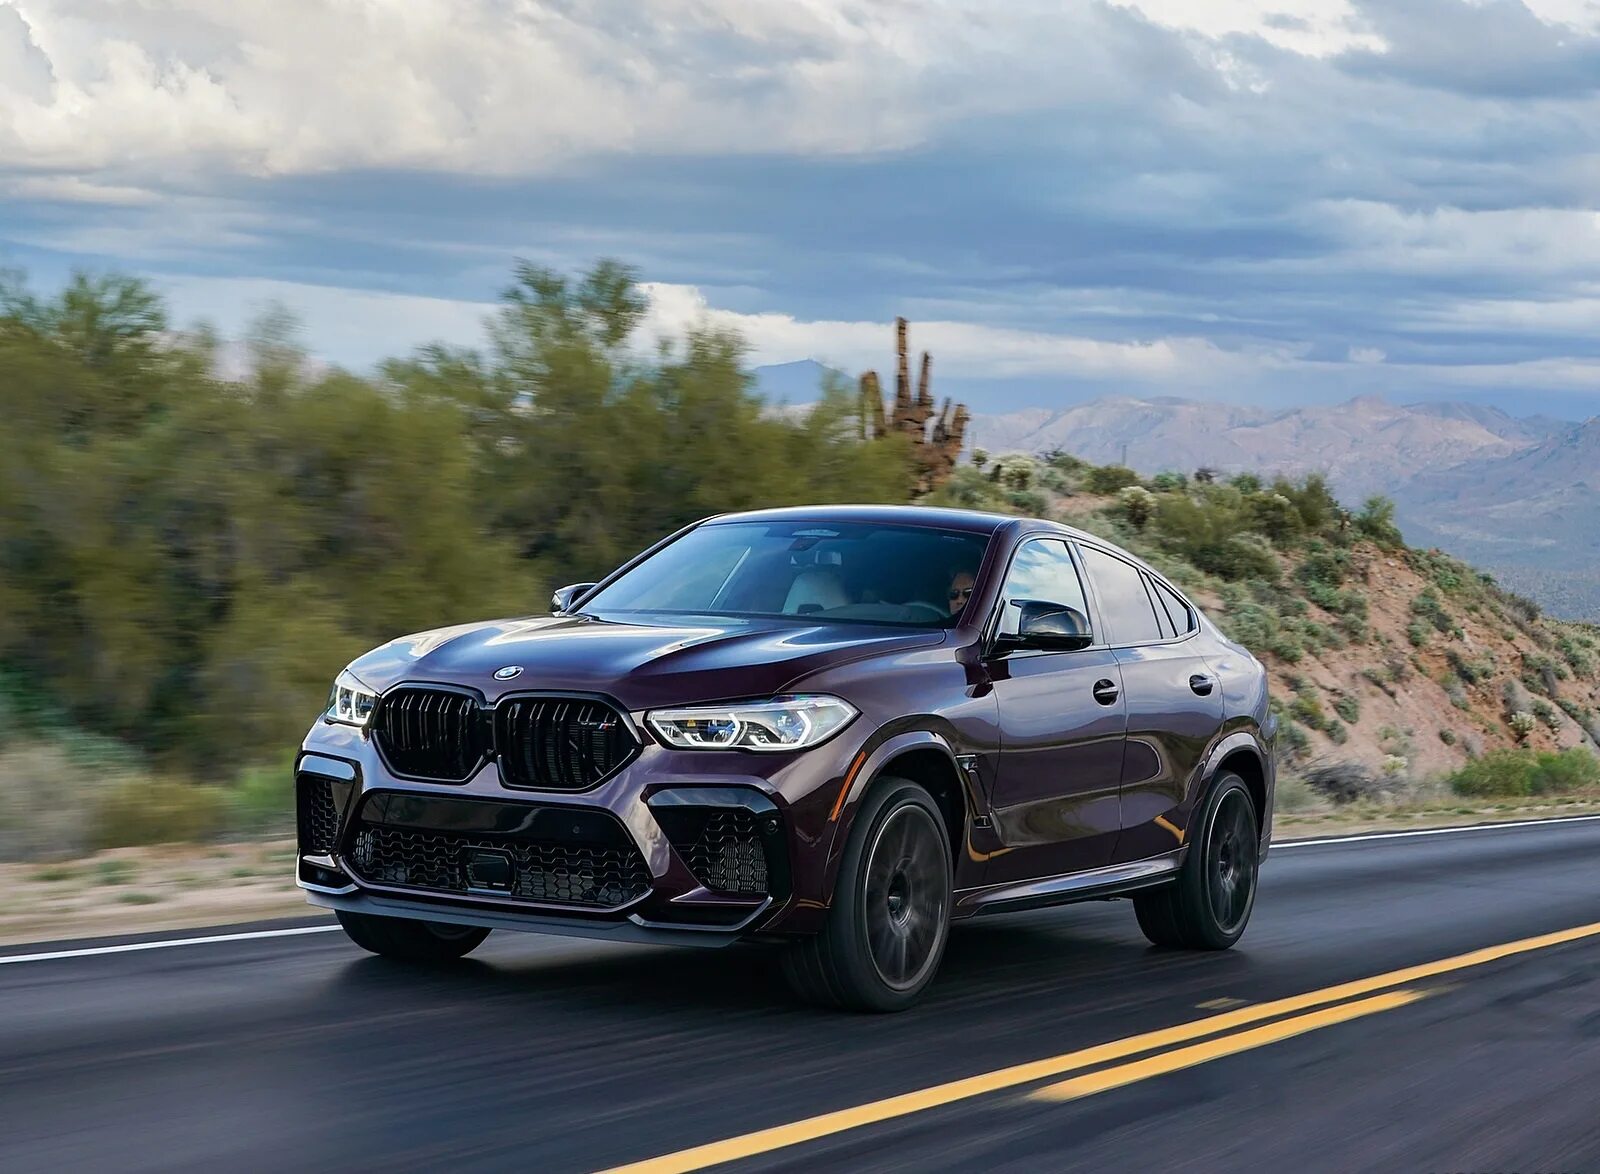 X6 competition. BMW x6m 2020. BMW x6m Competition 2023. БМВ x6m Competition 2020. BMW x6 Компетишн 2020.